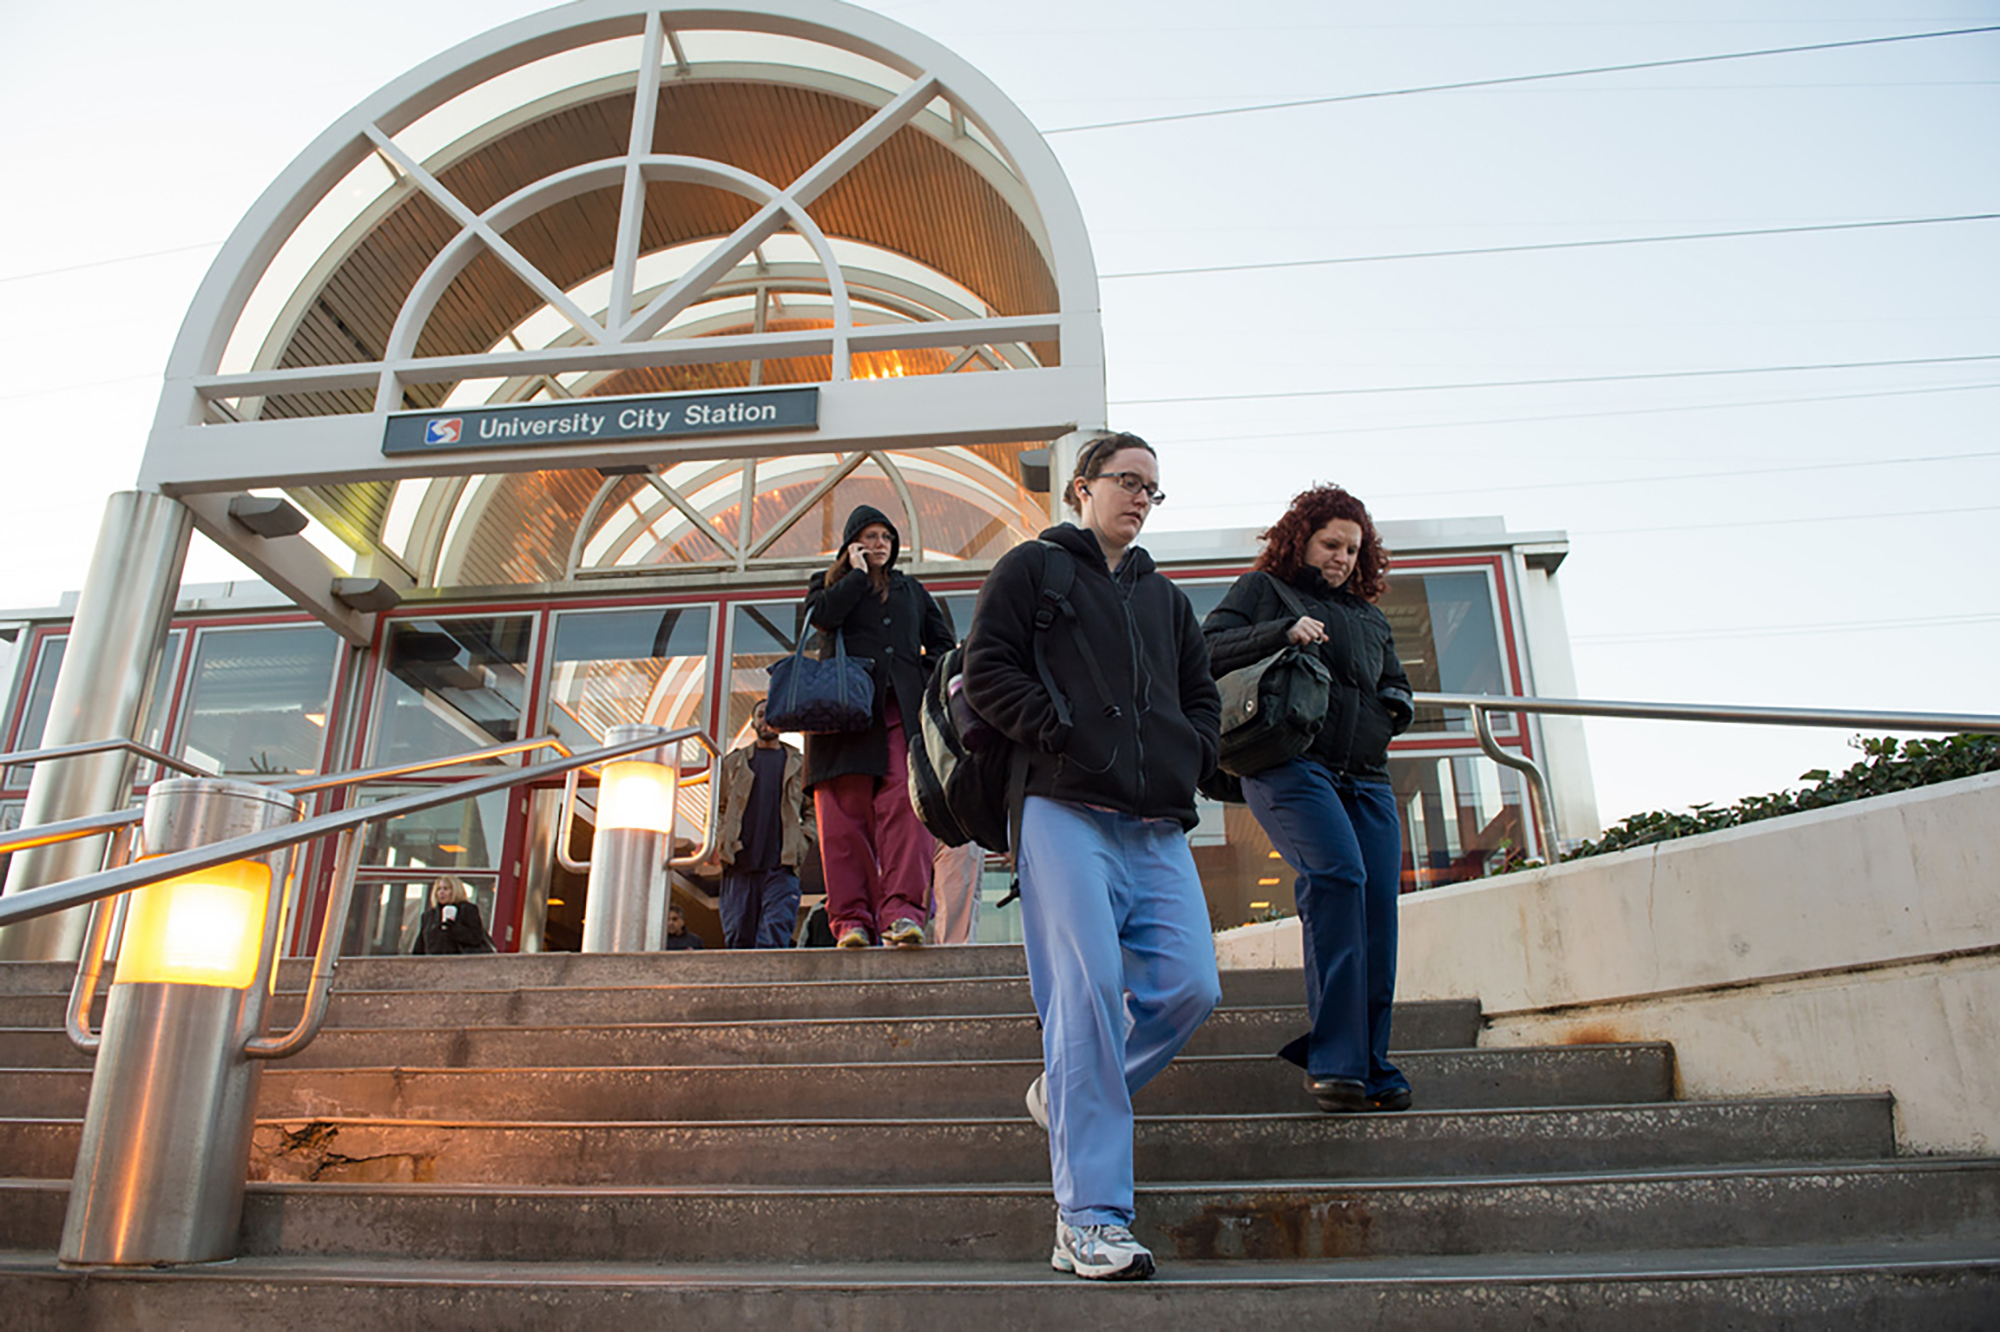 Commuters exiting Septa's University City Station outside walking down the stairs.